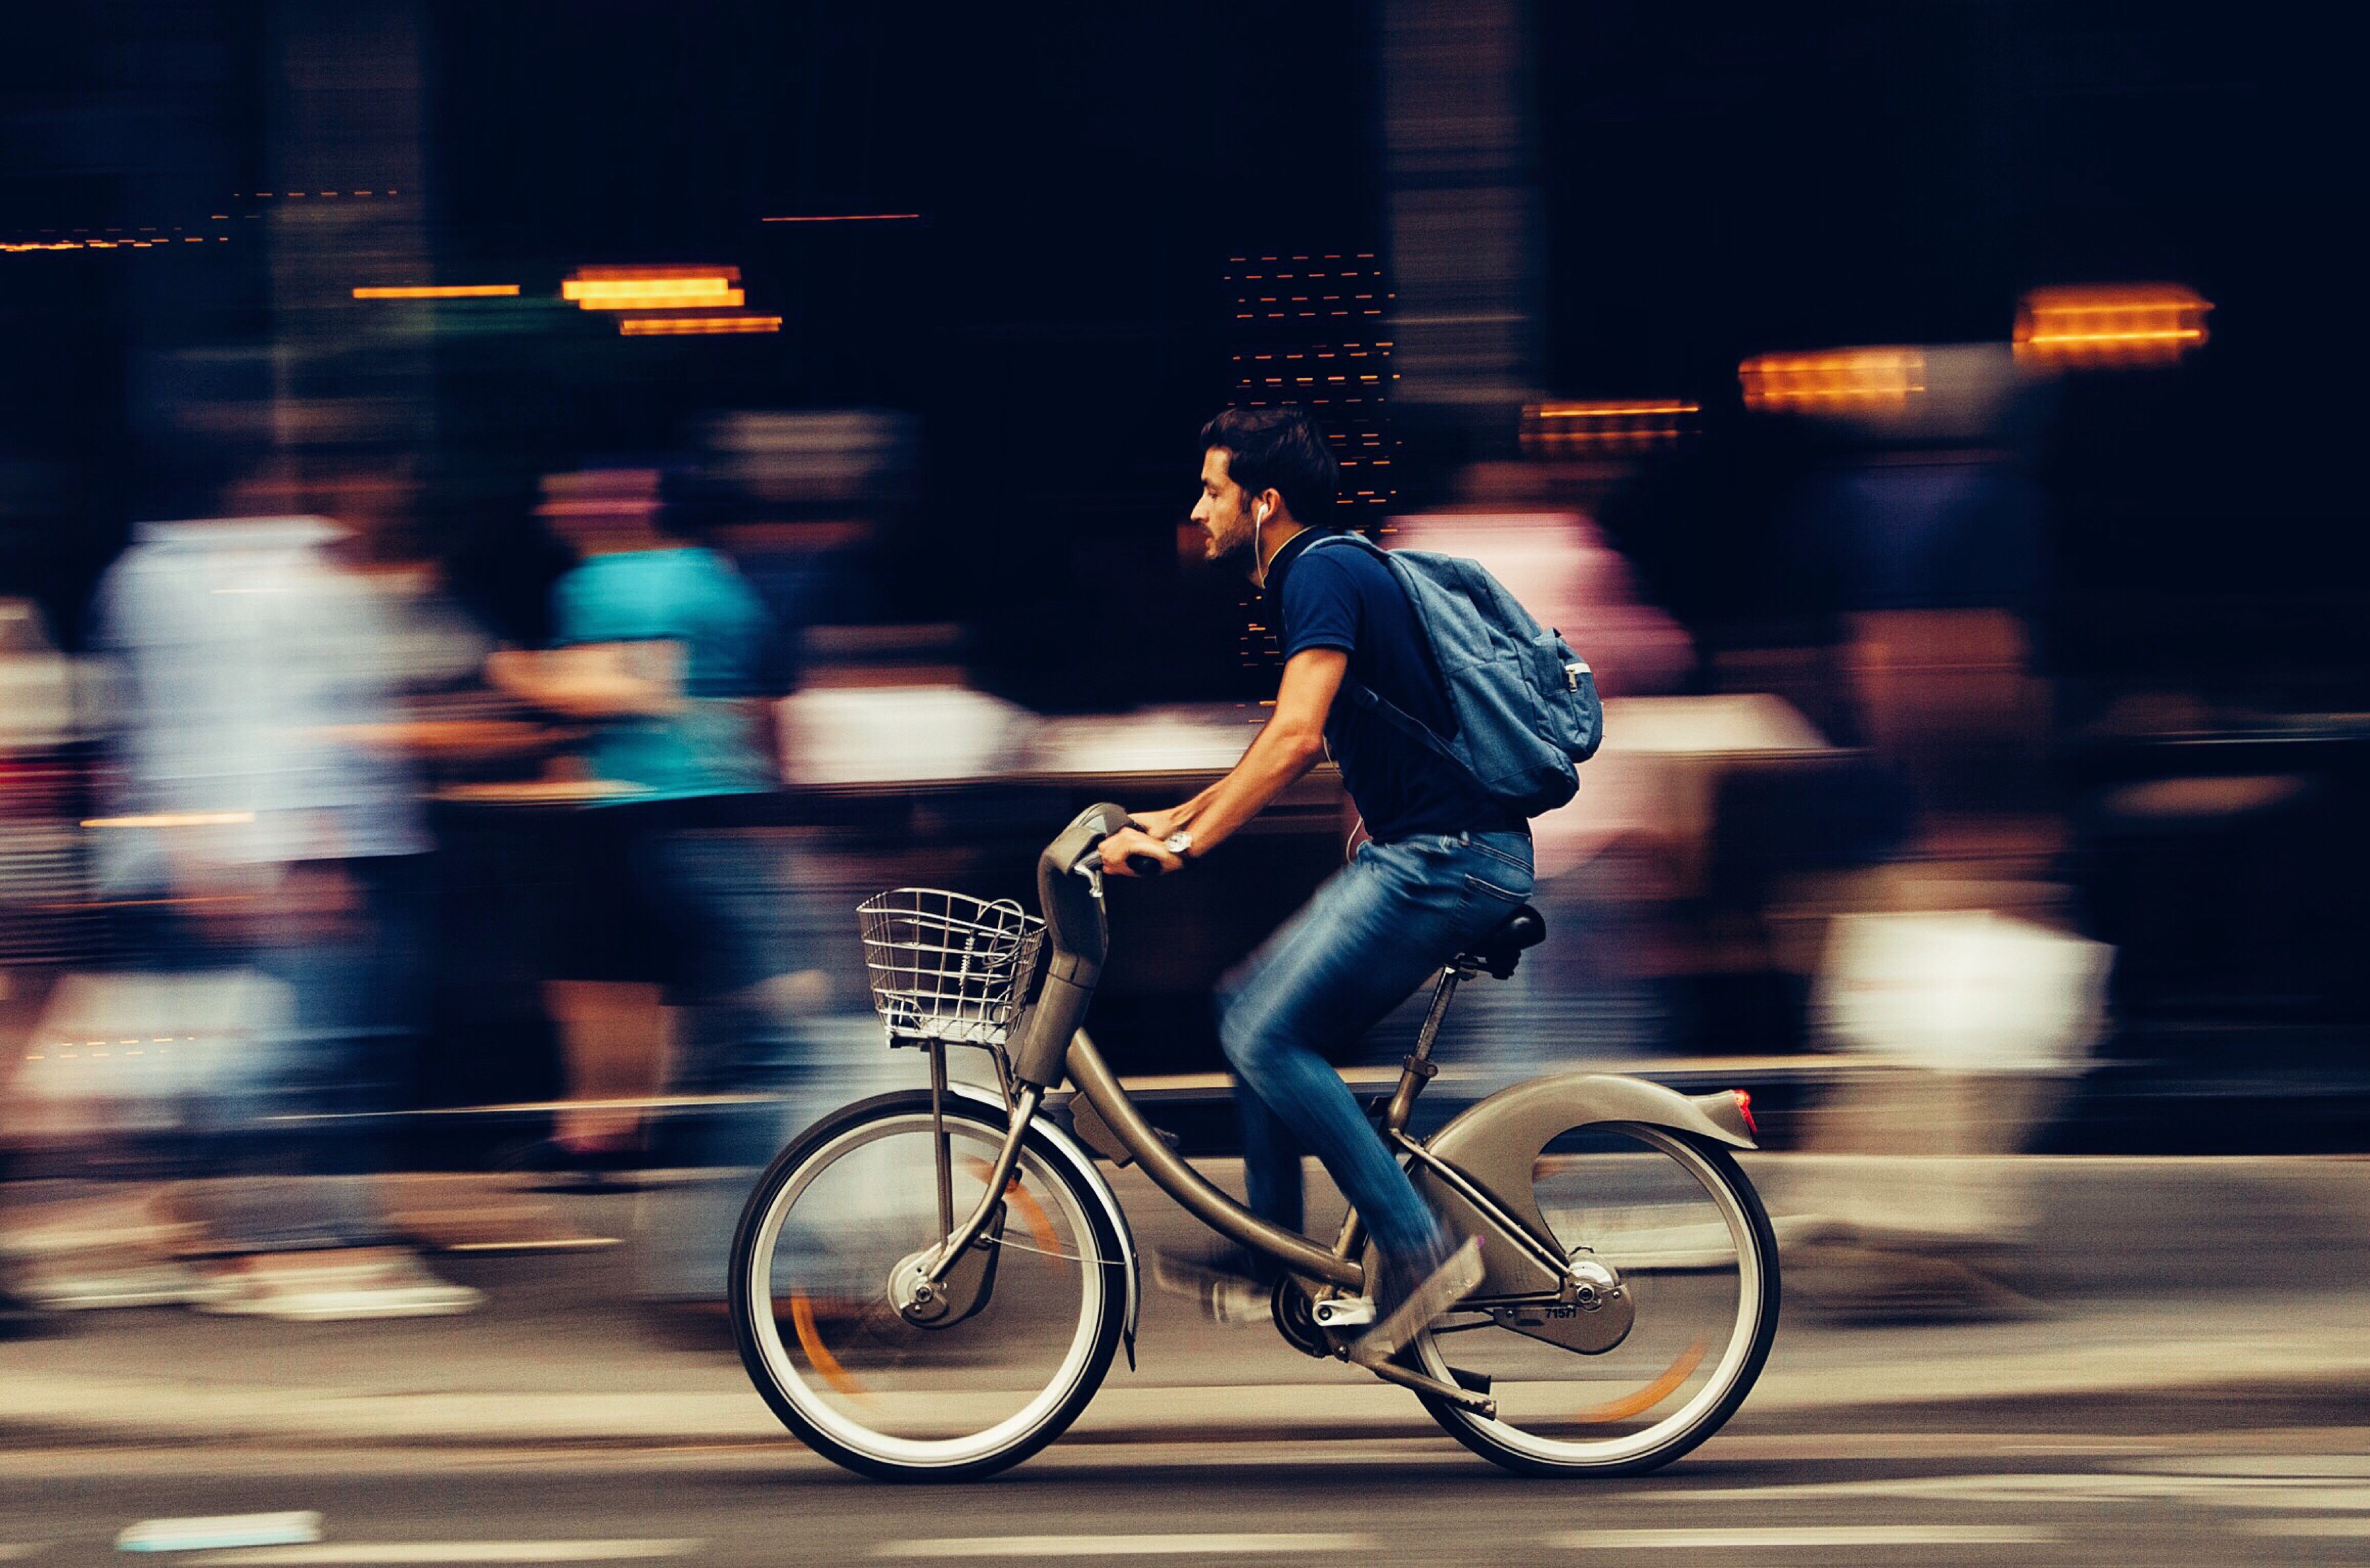 Often seen as a great way to exercise and see the sights of local cities, riding bicycles has become more in-fashion as a way to reduce a person’s carbon footprint and help the environment.